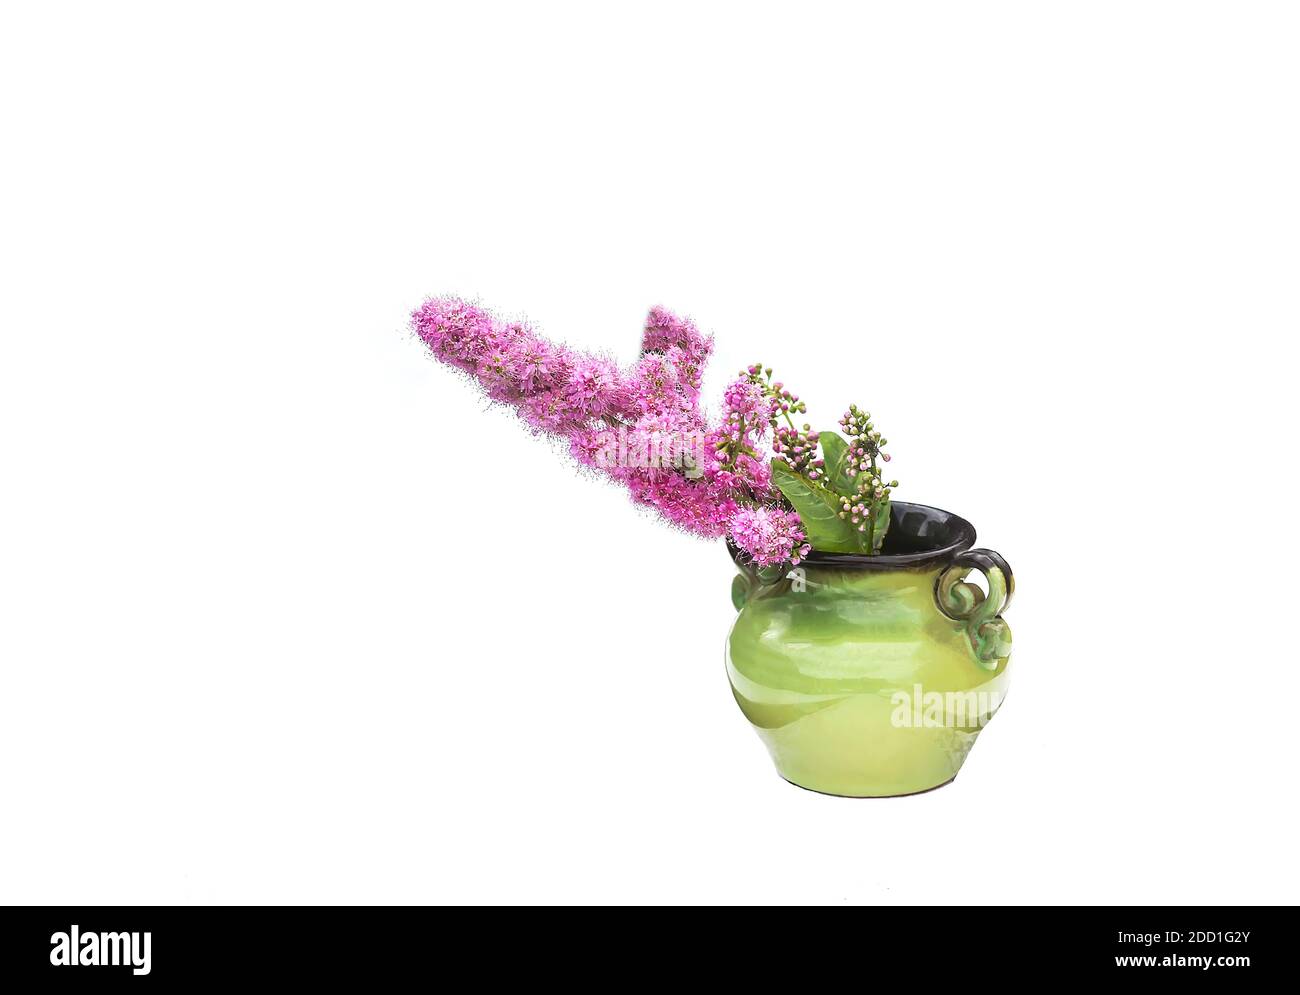 Astilbe plant pink flowers in ceramic vase outdoors. Stock Photo